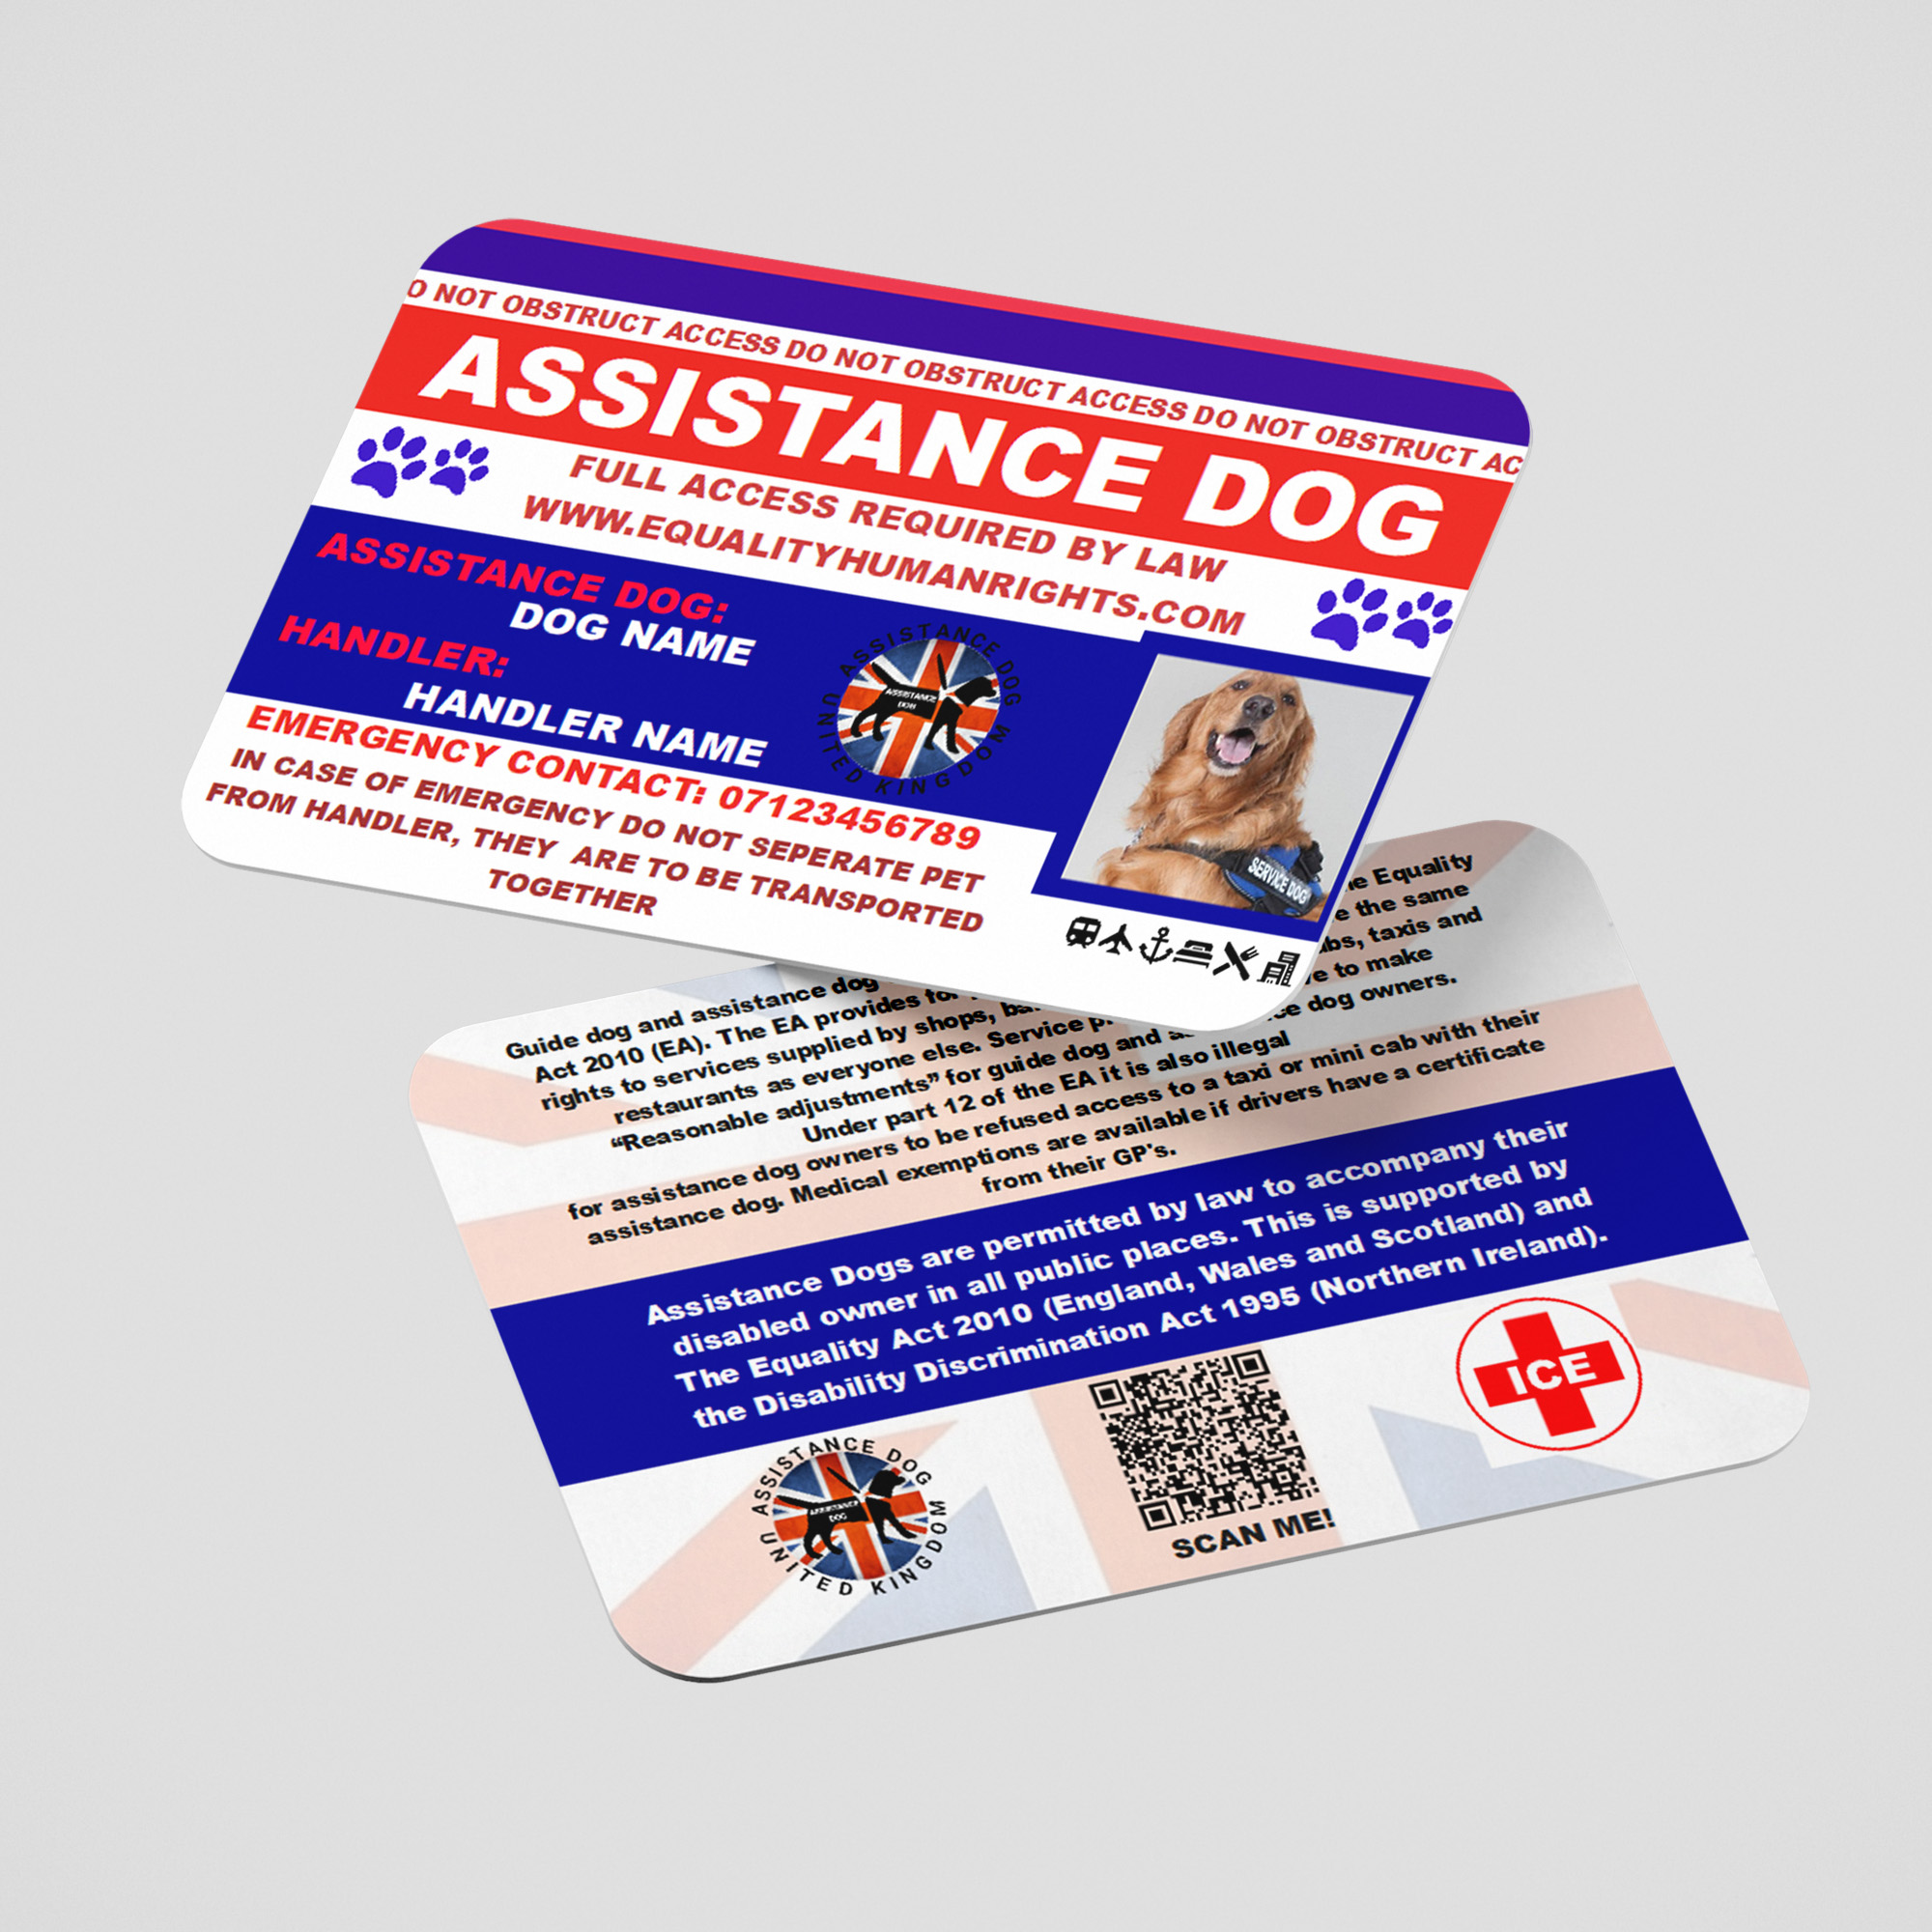 Assistance Dog Card AD12